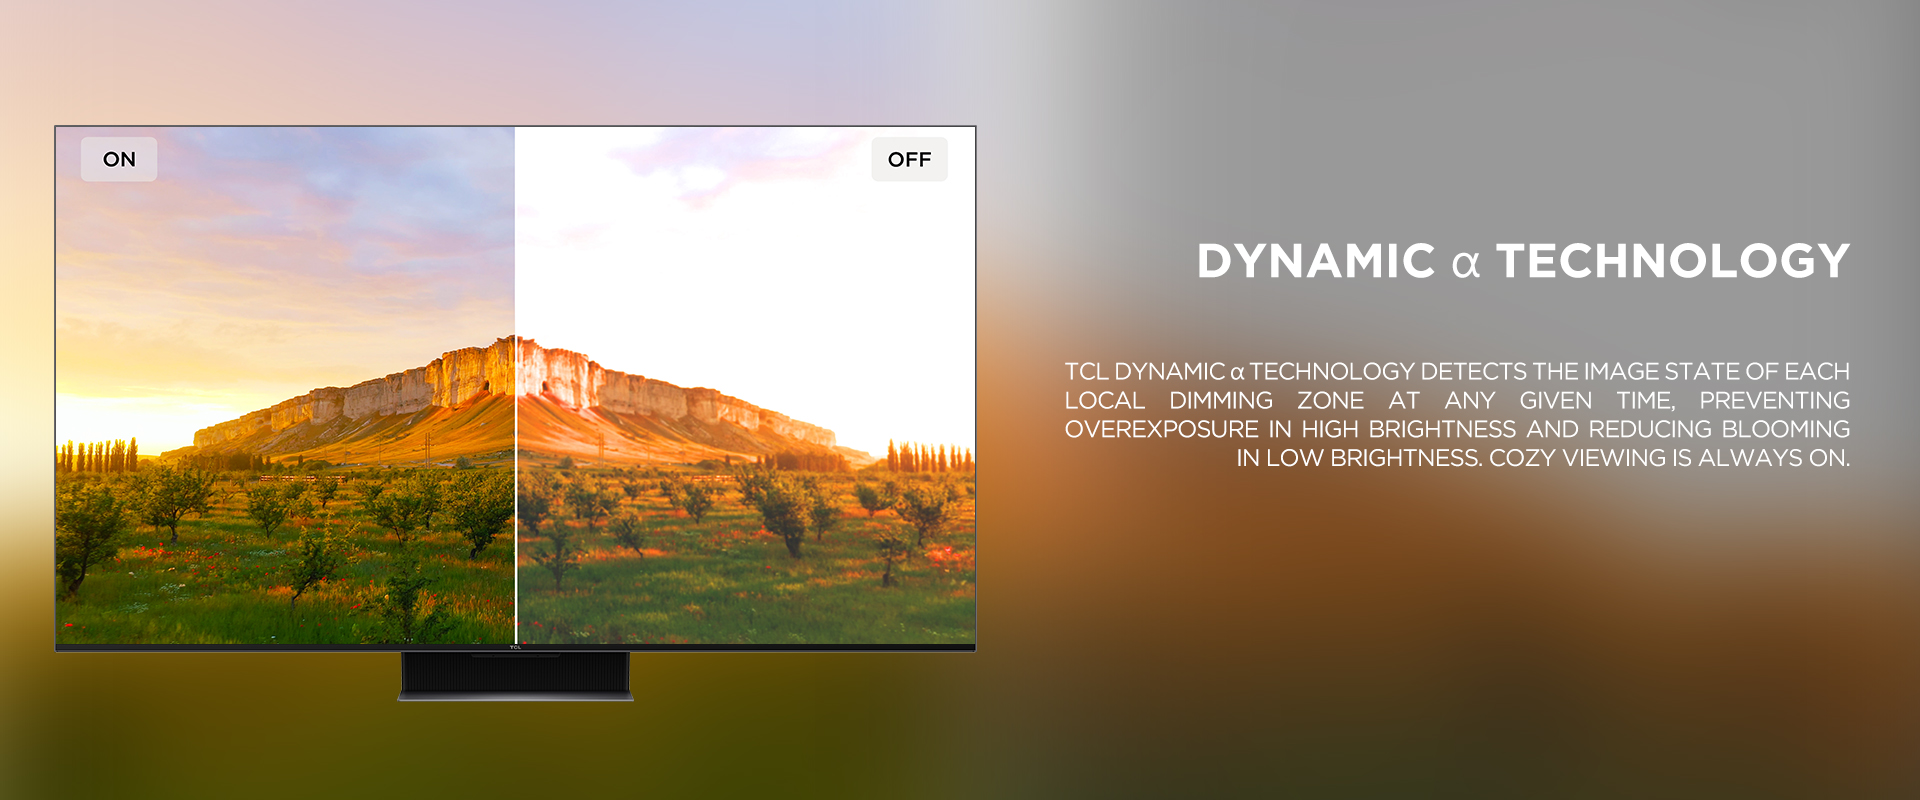 Dynamic α Technology - TCL Dynamic α Technology detects the image state of each local dimming zone at any given time, preventing overexposure in high brightness and reducing blooming in low brightness. Cozy Viewing is always on.
